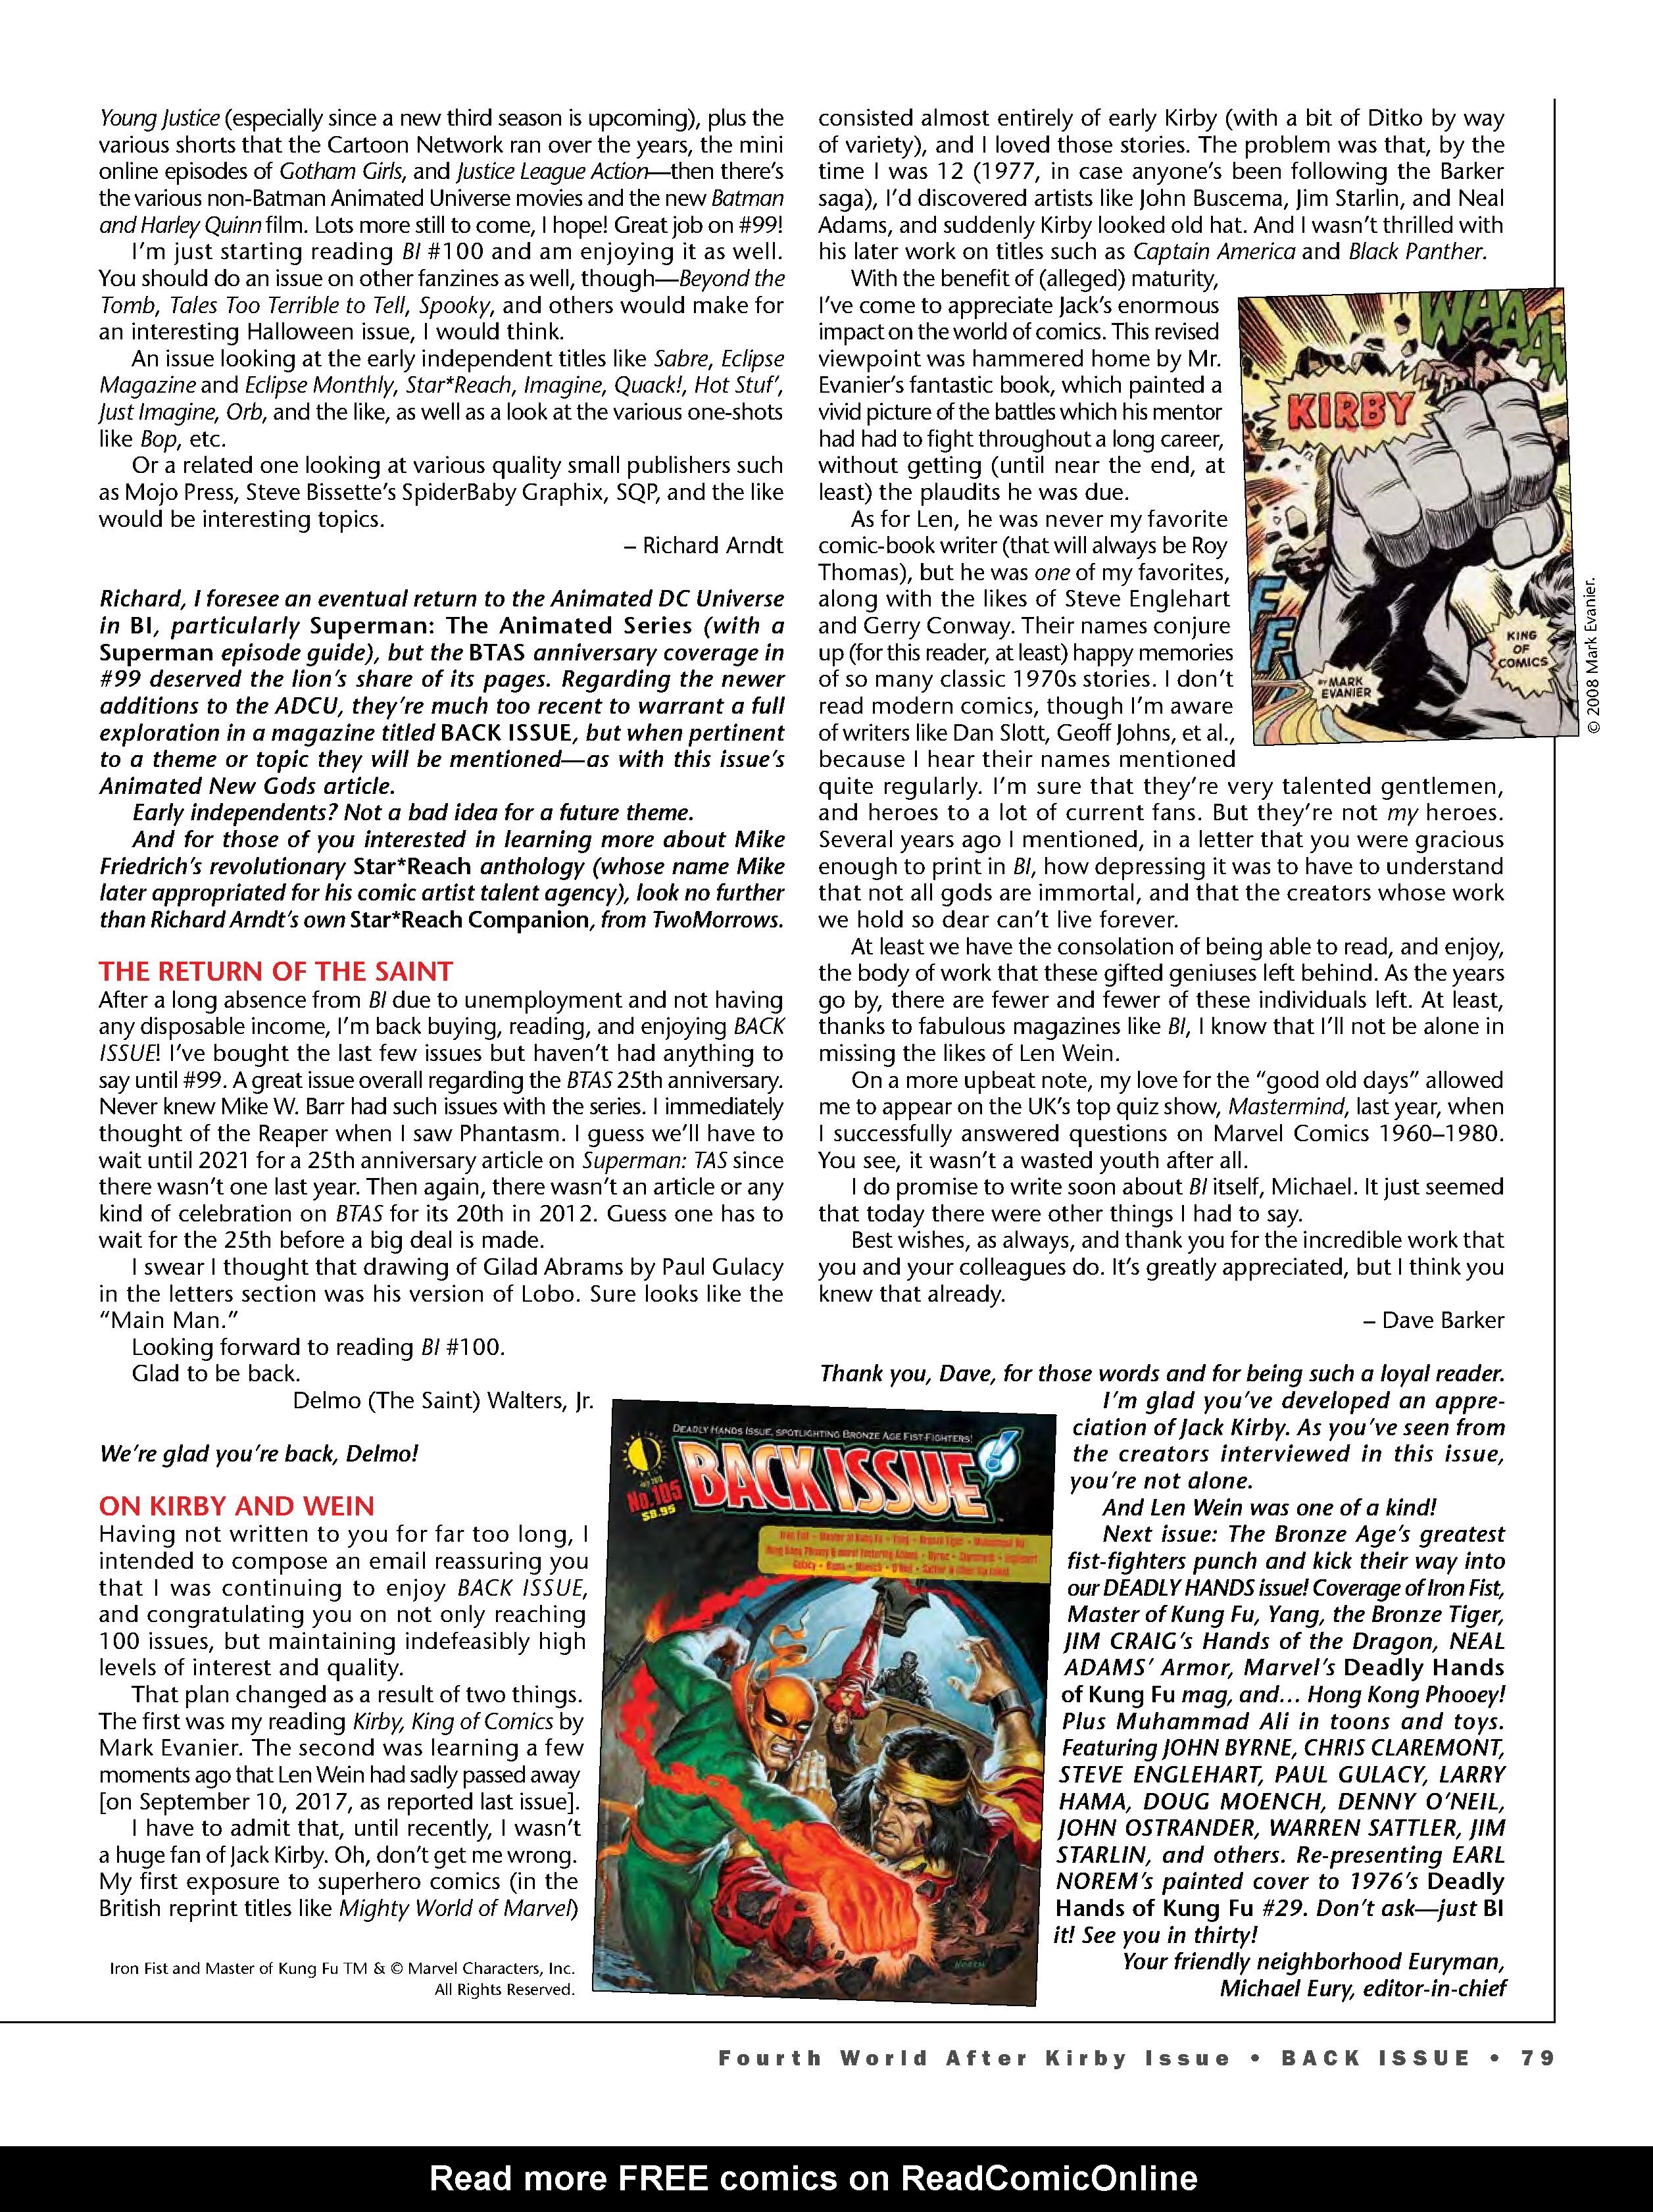 Read online Back Issue comic -  Issue #104 - 81